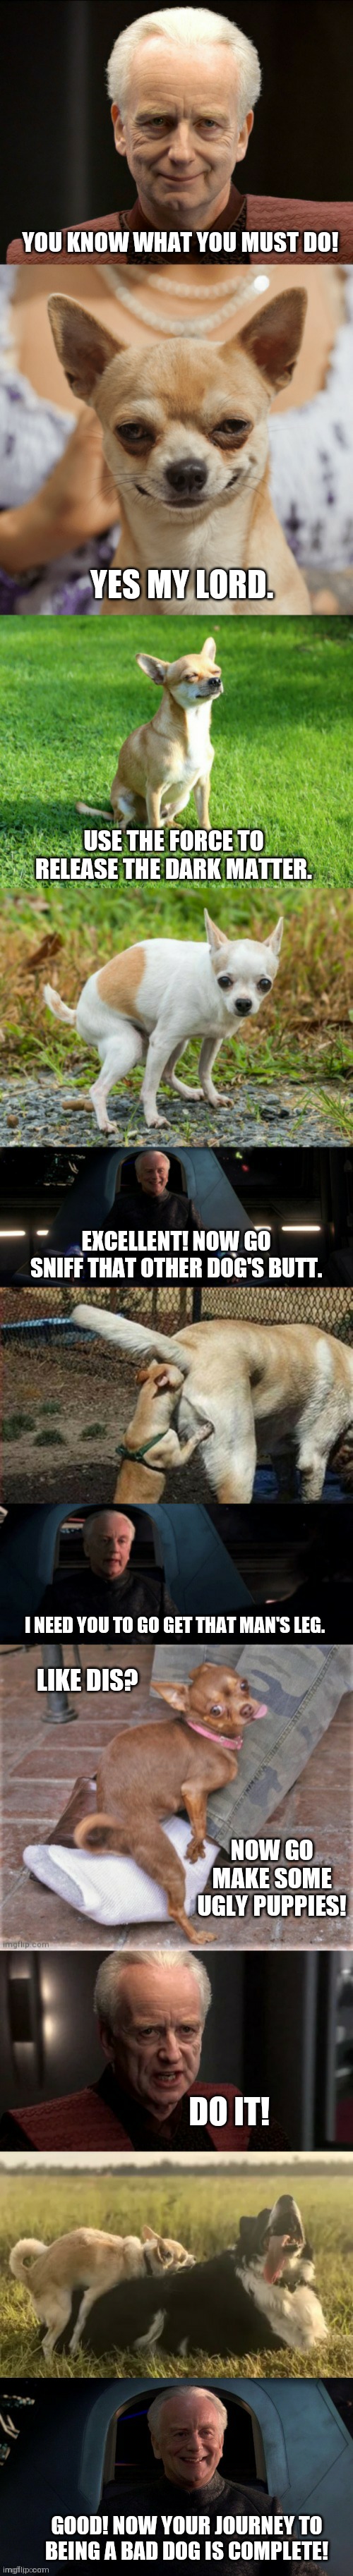 Palpatine and evil chihuahua 2 | YOU KNOW WHAT YOU MUST DO! YES MY LORD. USE THE FORCE TO RELEASE THE DARK MATTER. EXCELLENT! NOW GO SNIFF THAT OTHER DOG'S BUTT. I NEED YOU TO GO GET THAT MAN'S LEG. LIKE DIS? NOW GO MAKE SOME UGLY PUPPIES! DO IT! GOOD! NOW YOUR JOURNEY TO BEING A BAD DOG IS COMPLETE! | image tagged in palpatine and evil chihuahua 2 | made w/ Imgflip meme maker